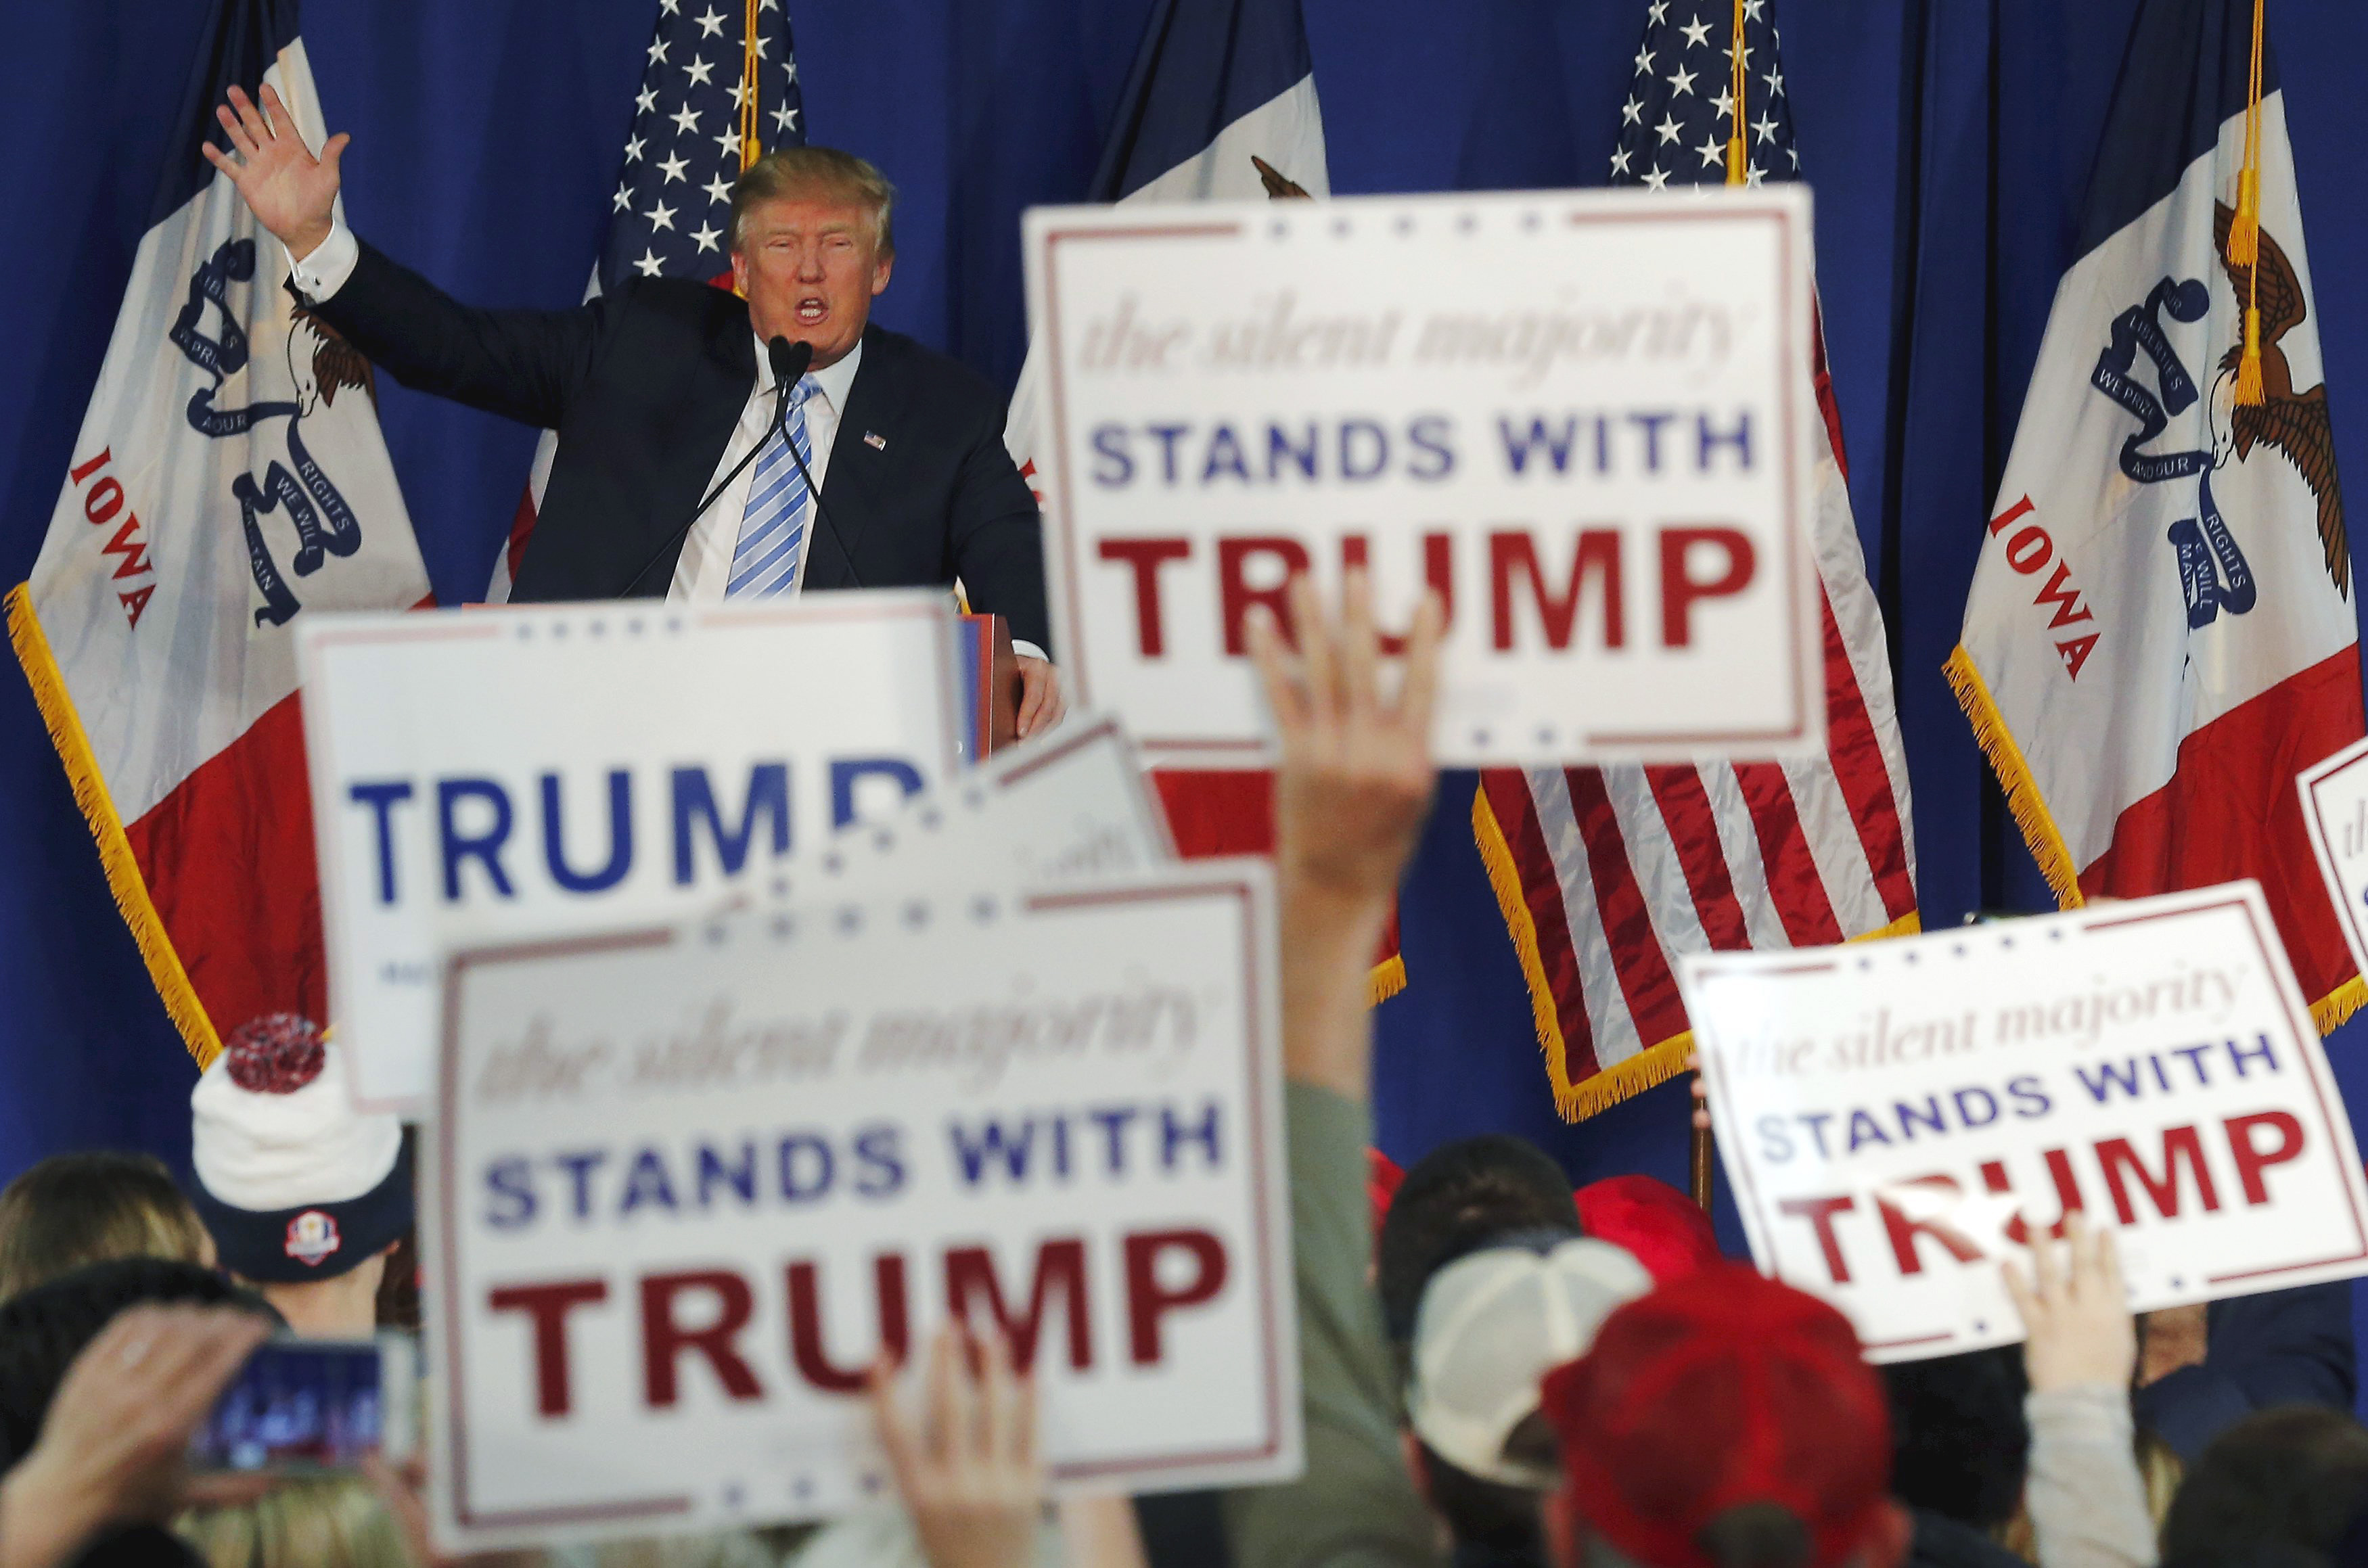 U.S. Republican presidential candidate Donald Trump speaks at a campaign event in Muscatine